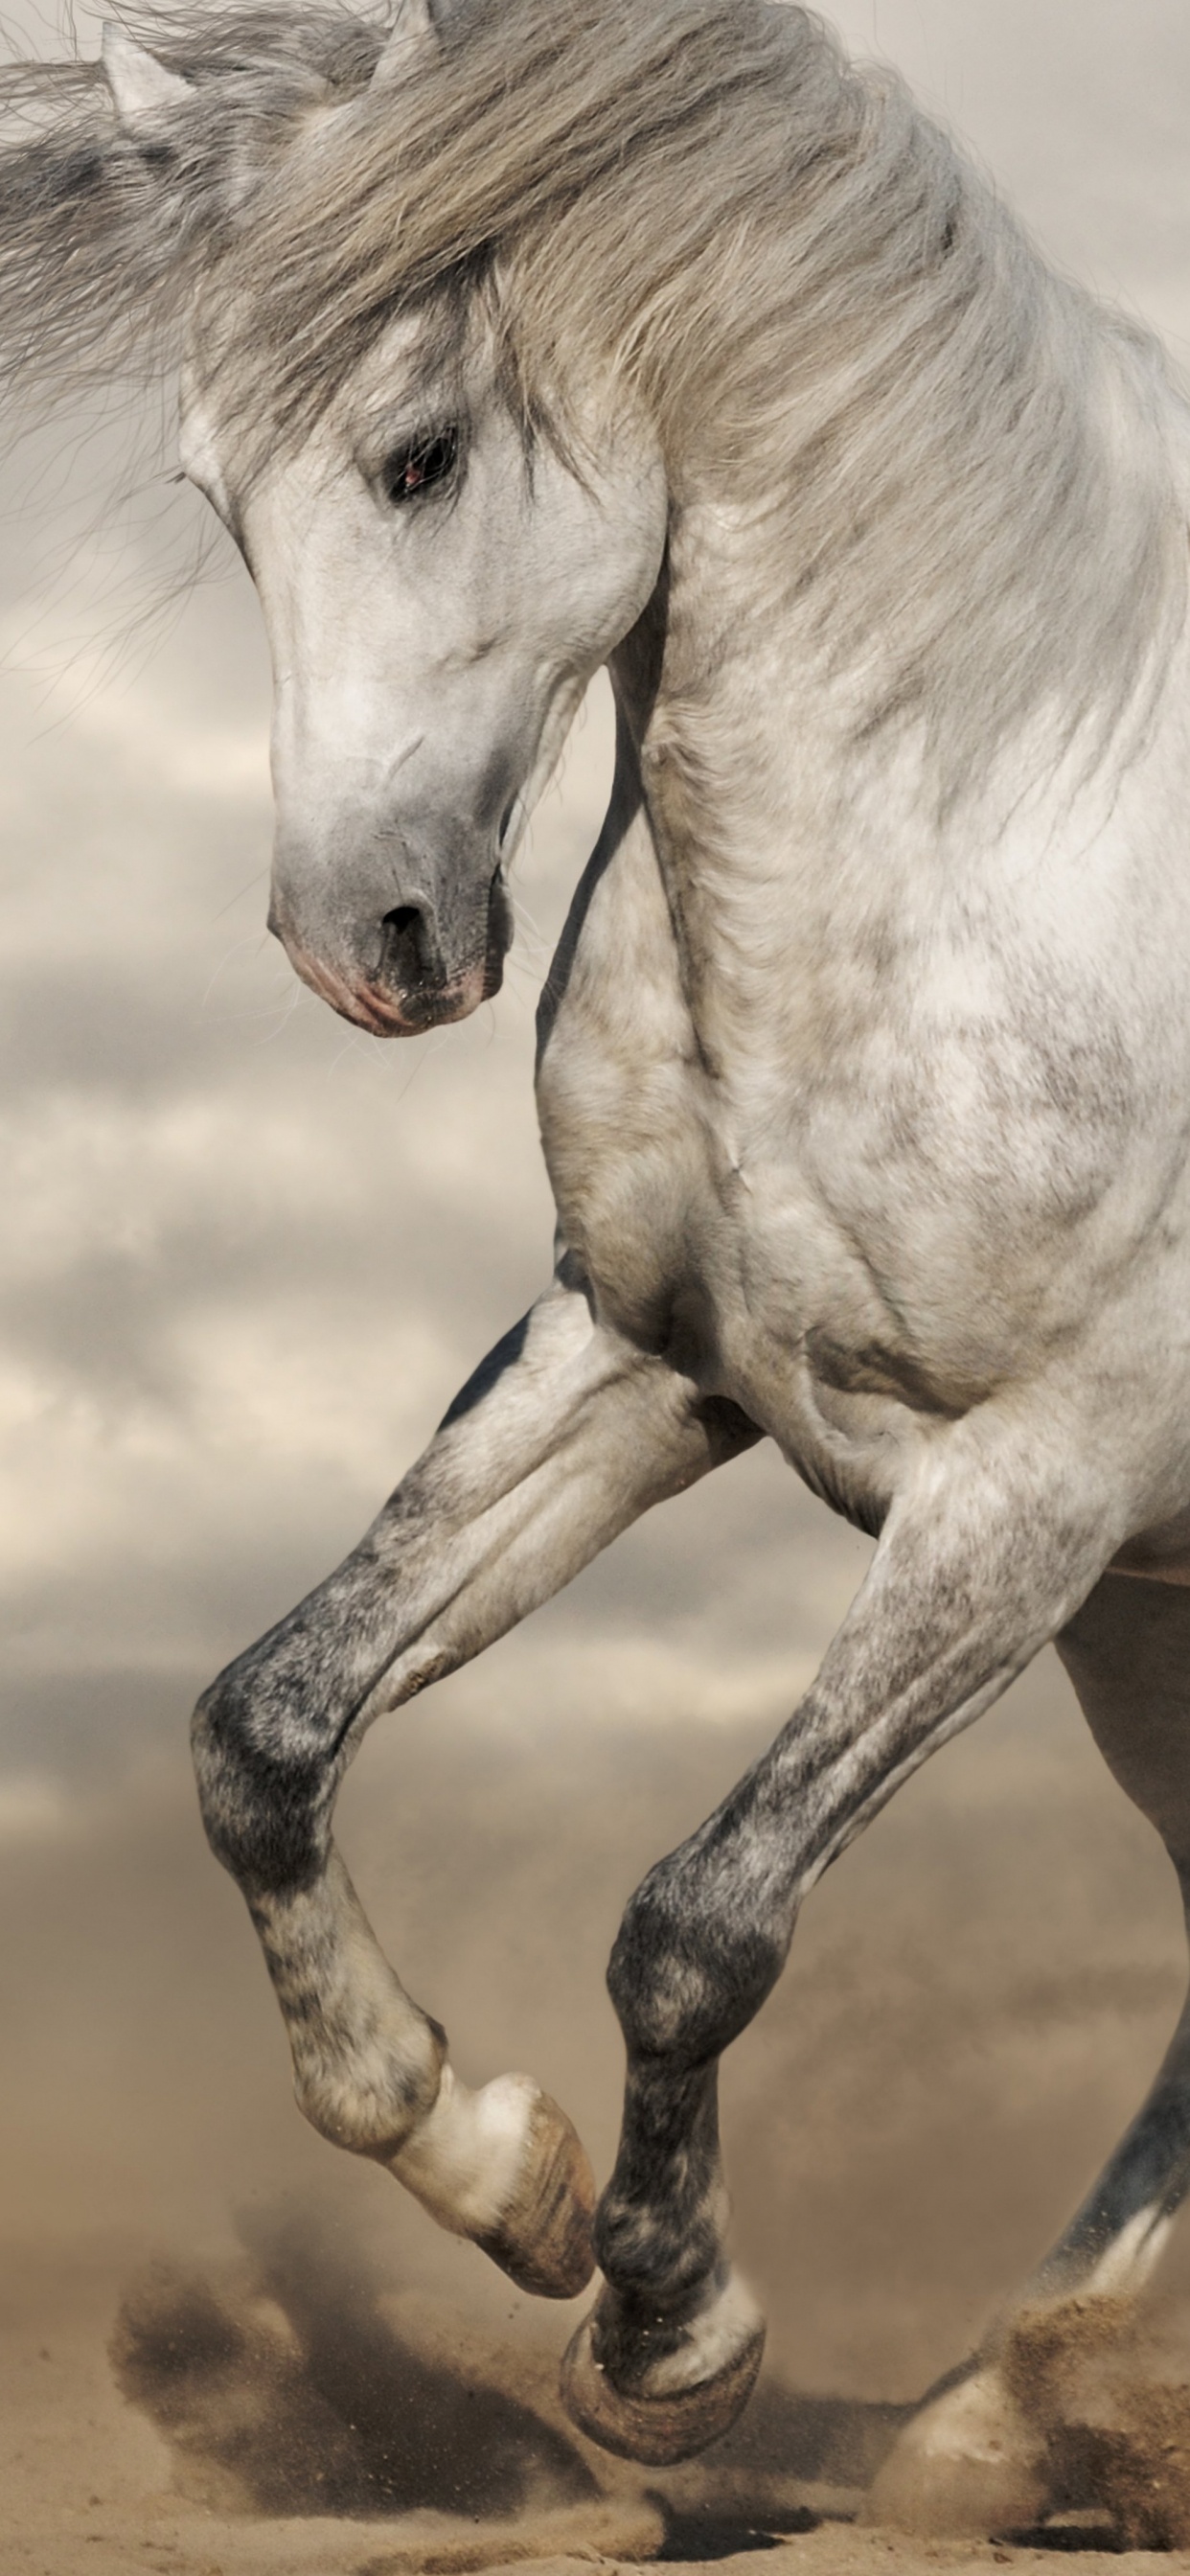 White Horse Running on Brown Sand During Daytime. Wallpaper in 1242x2688 Resolution